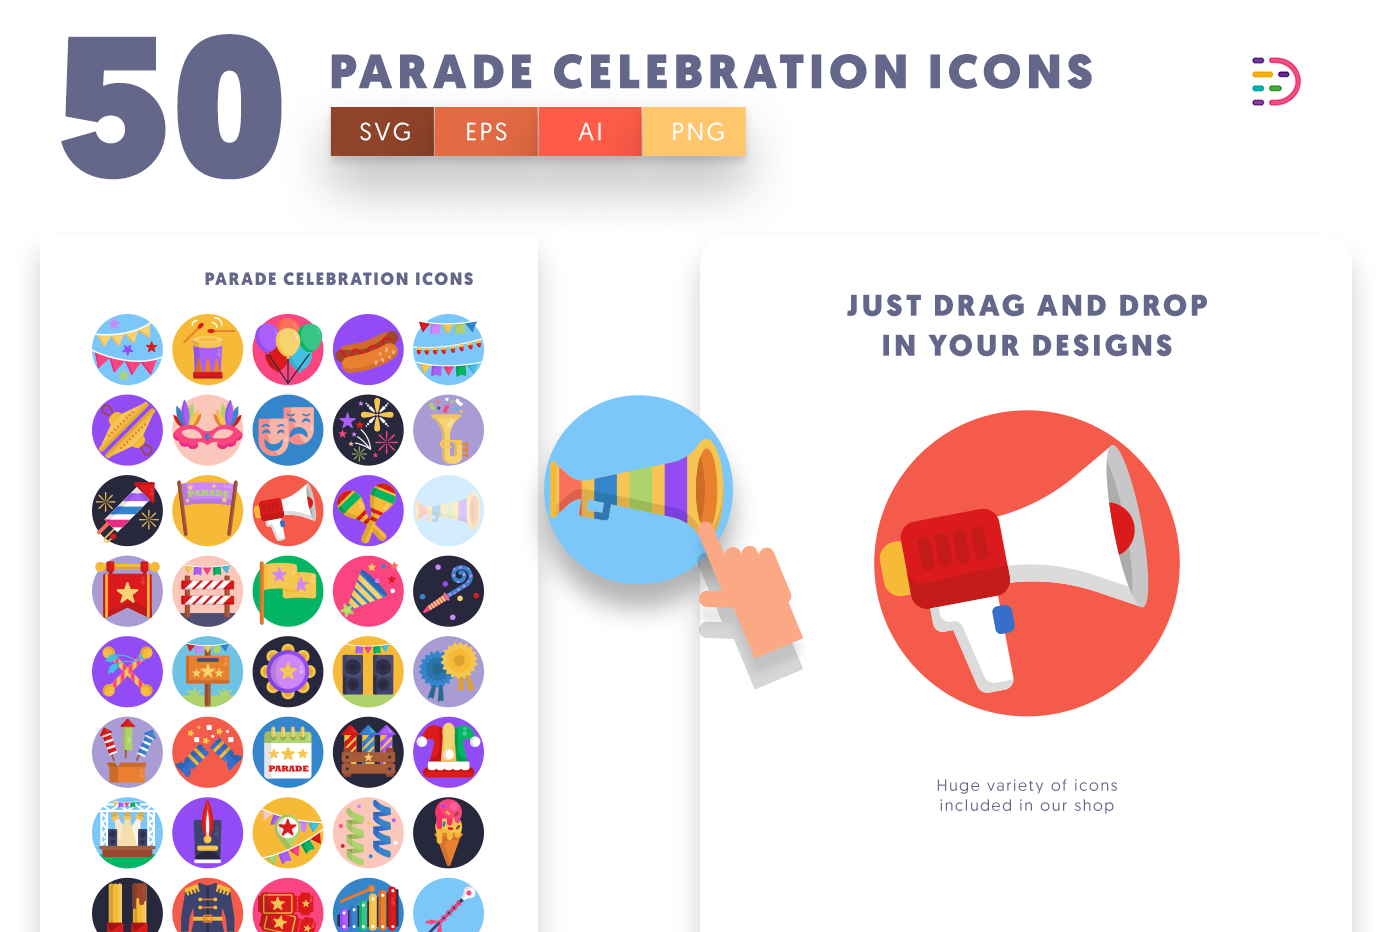 Drag and drop vector 50 Parade Celebration Icons 